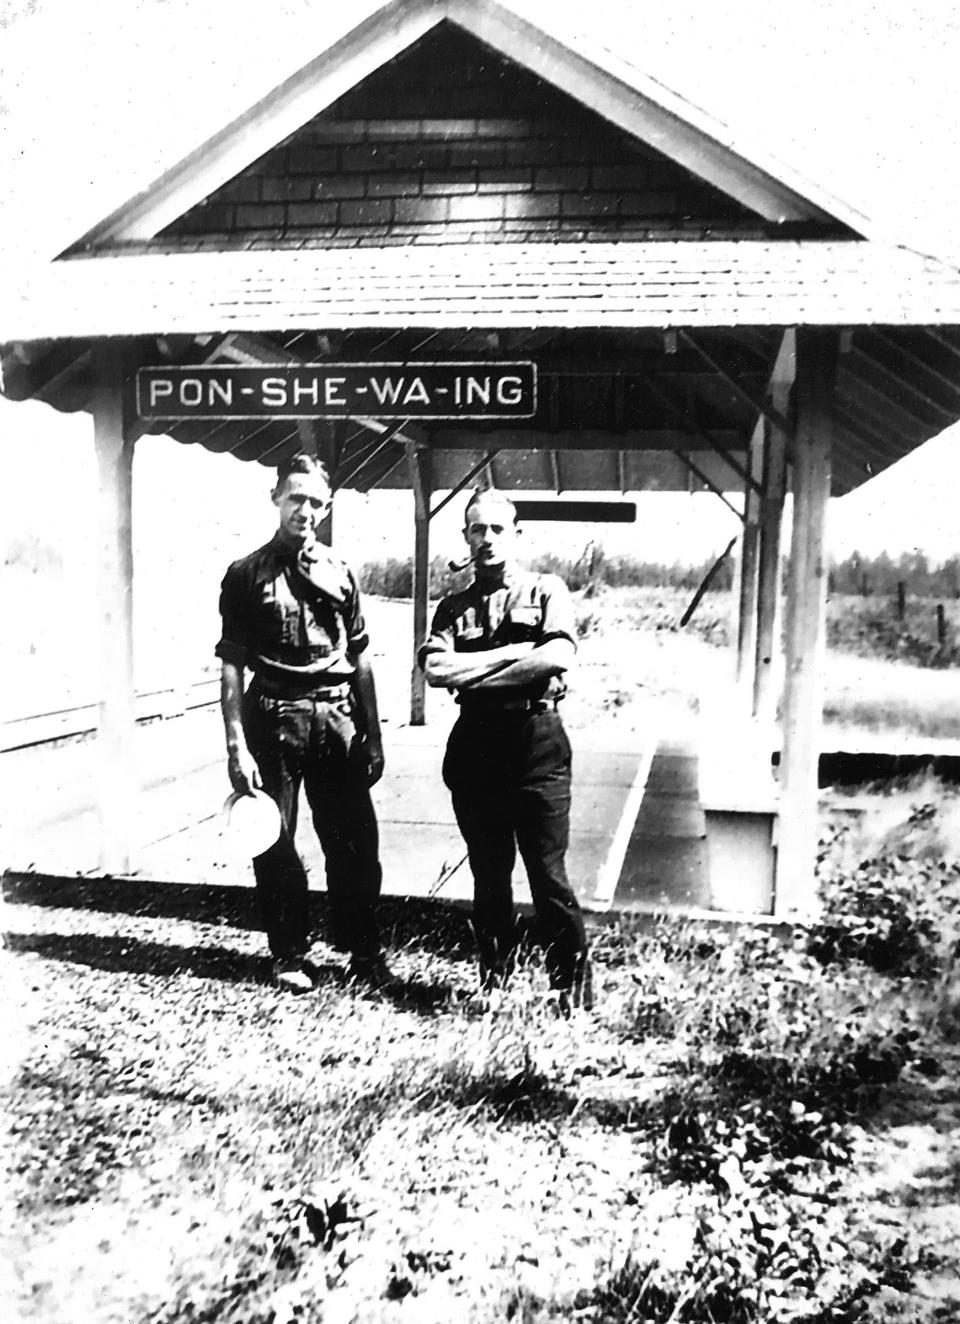 Two men pose for a photo at the original Ponshewaing flag stop, built by the Grand Rapids & Indiana Railroad in the late 1800s. Eventually demolished, the structure is the subject of a local reconstruction effort. A steering committee has been assembled to raise $50,000 to rebuild the flag stop on the old rail line — what is now the North Western State Trail.